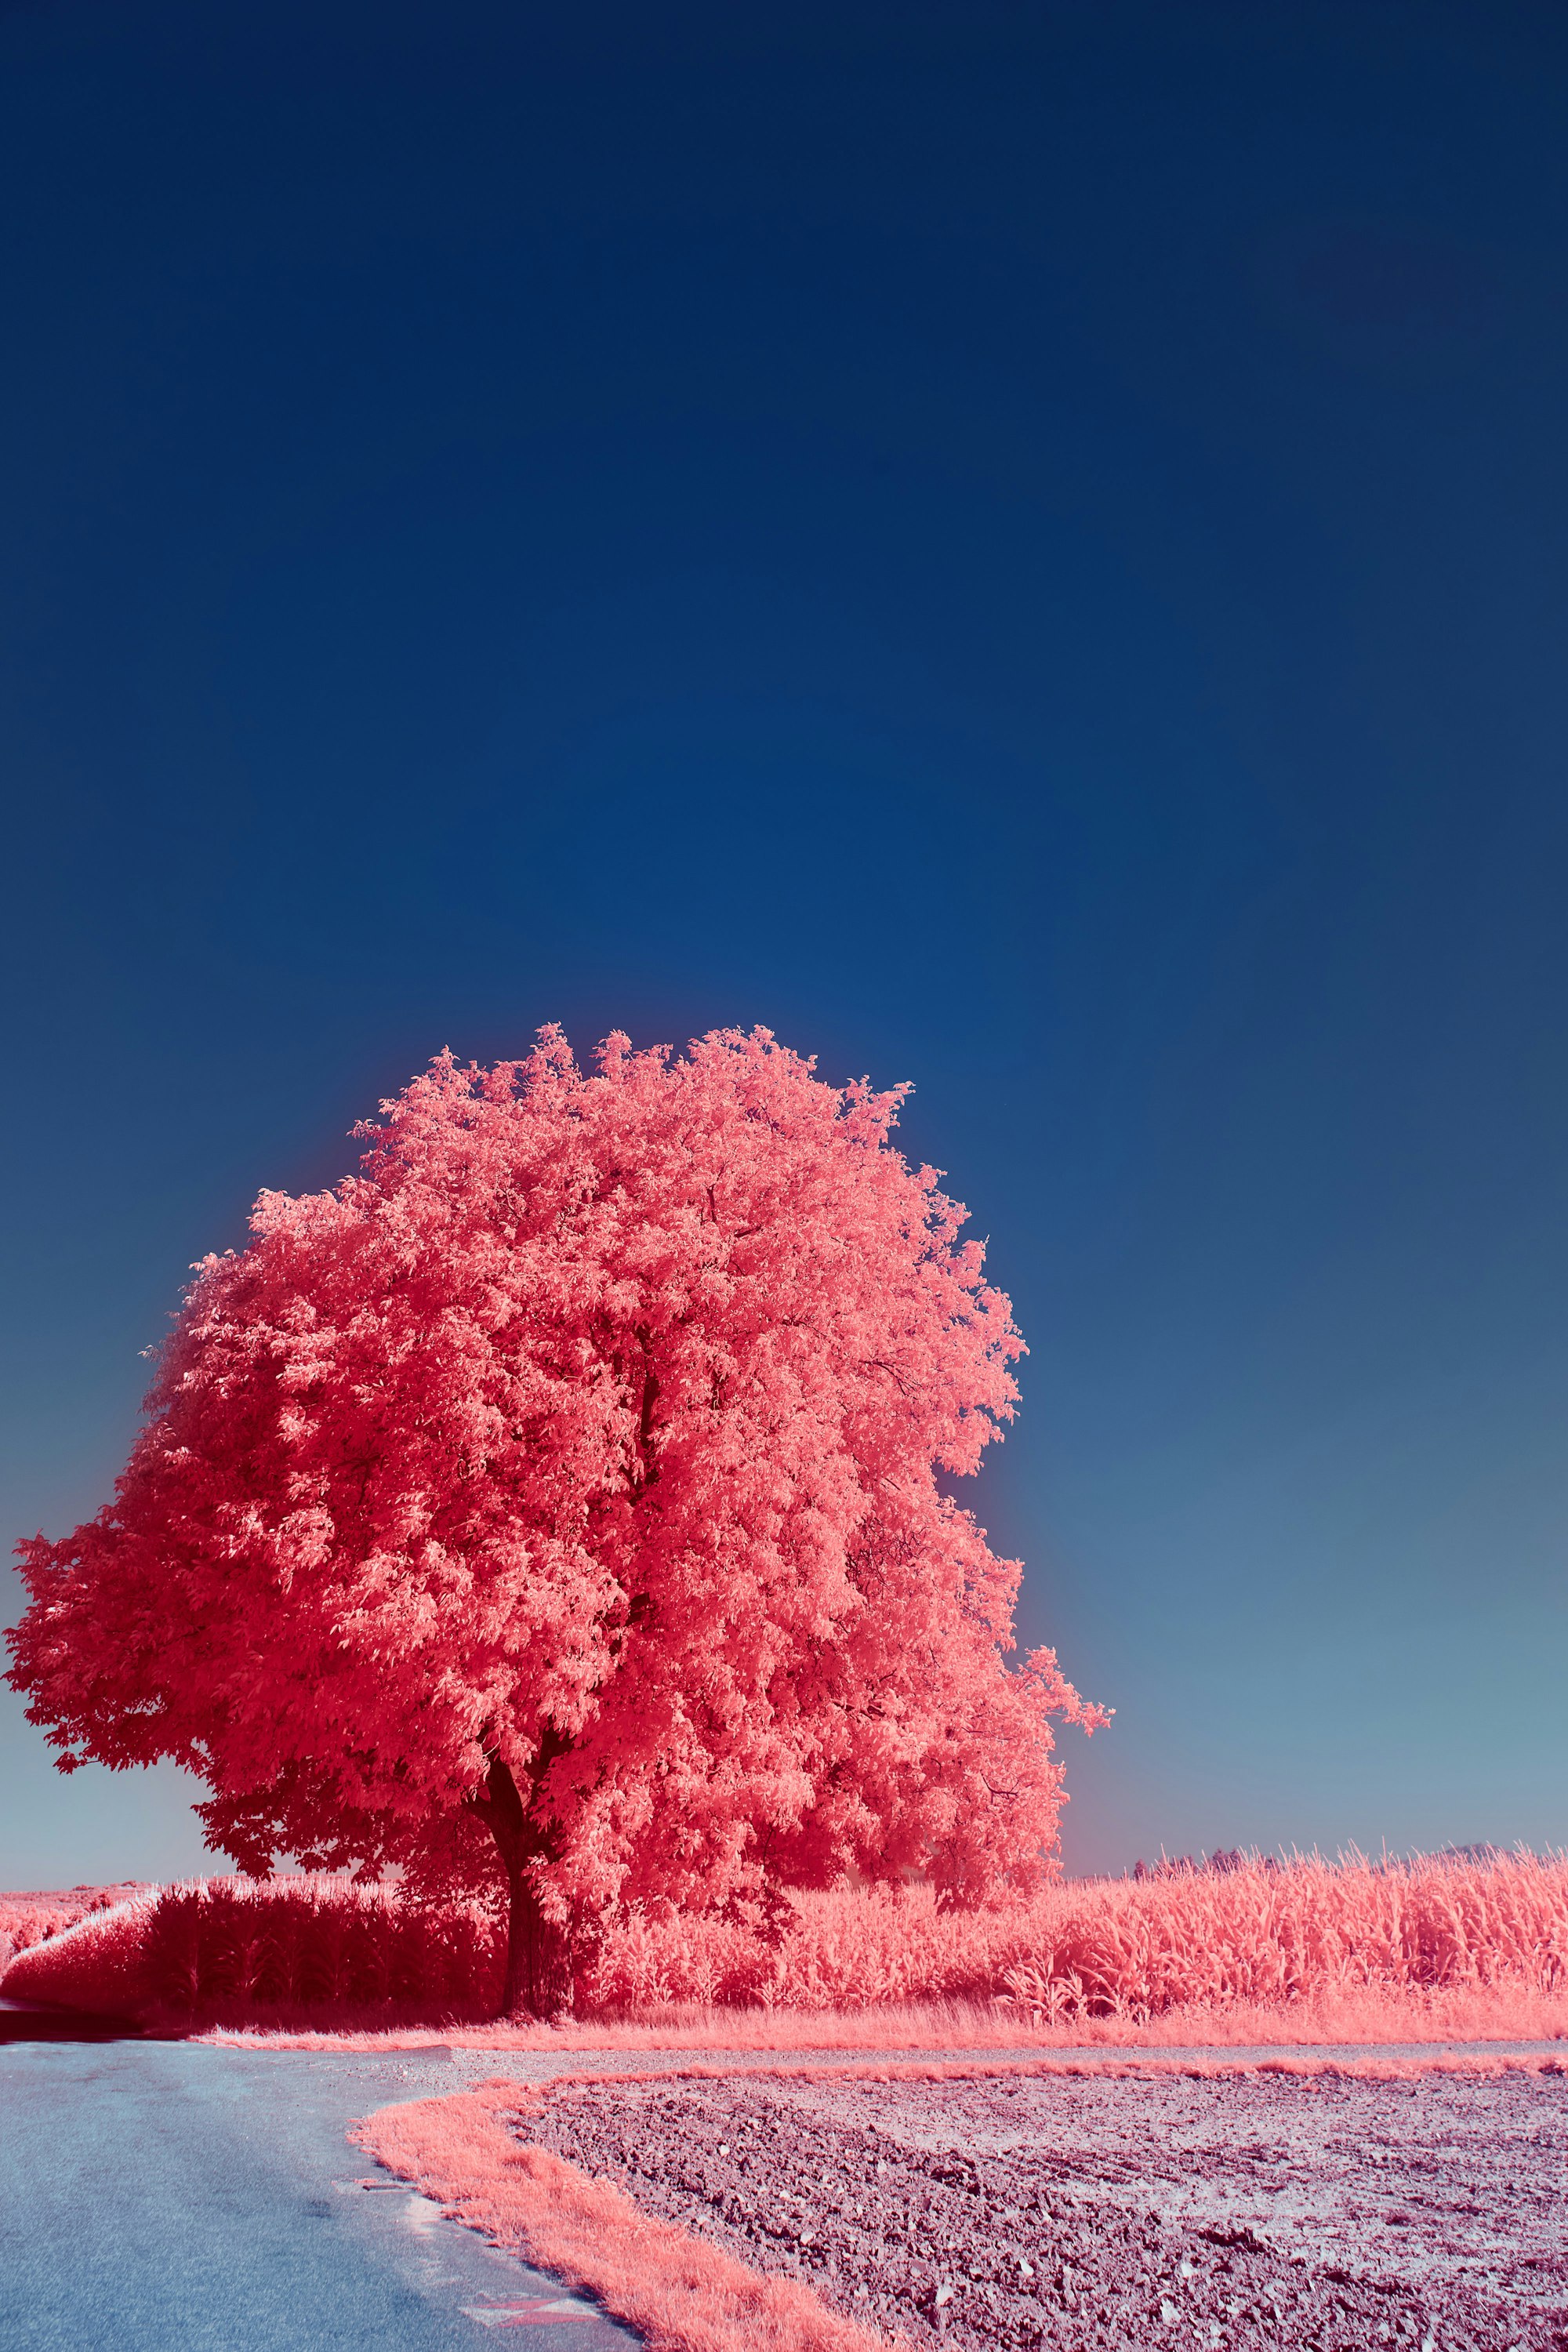 An amazingly pink tree